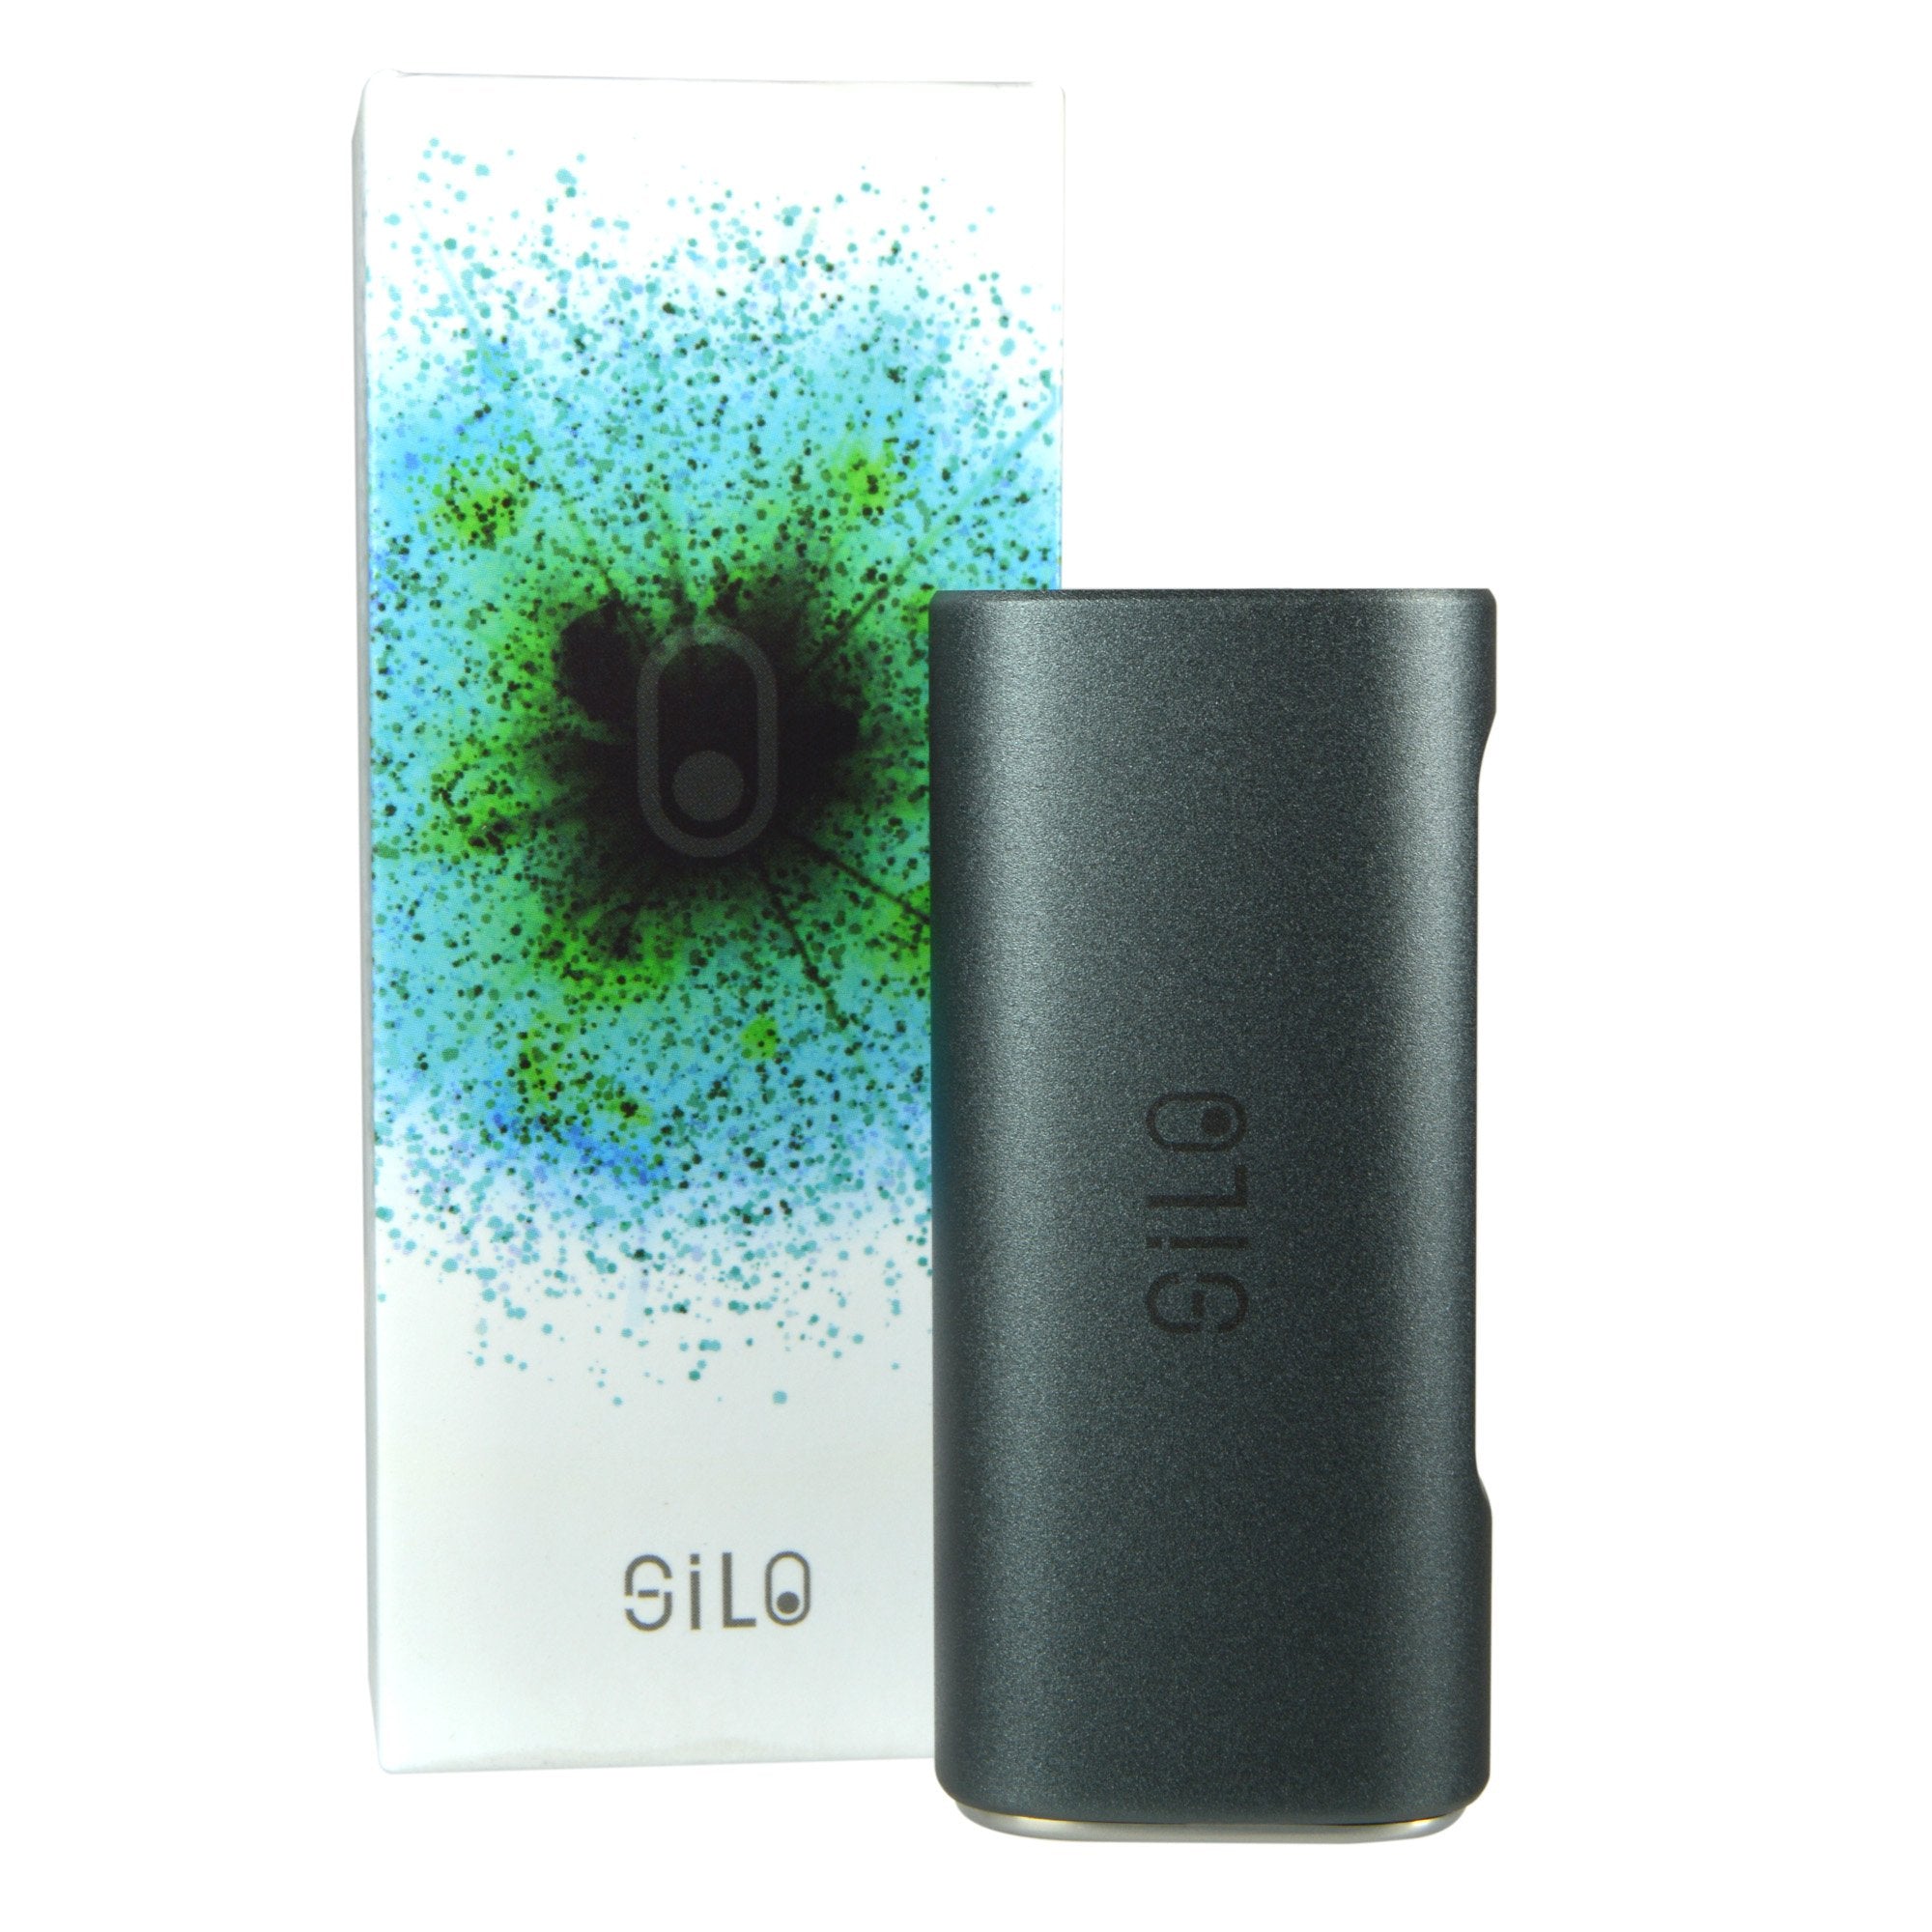 CCELL | Silo Vape Battery with USB Charger | 500mAh - Silver - 510 Thread - 1